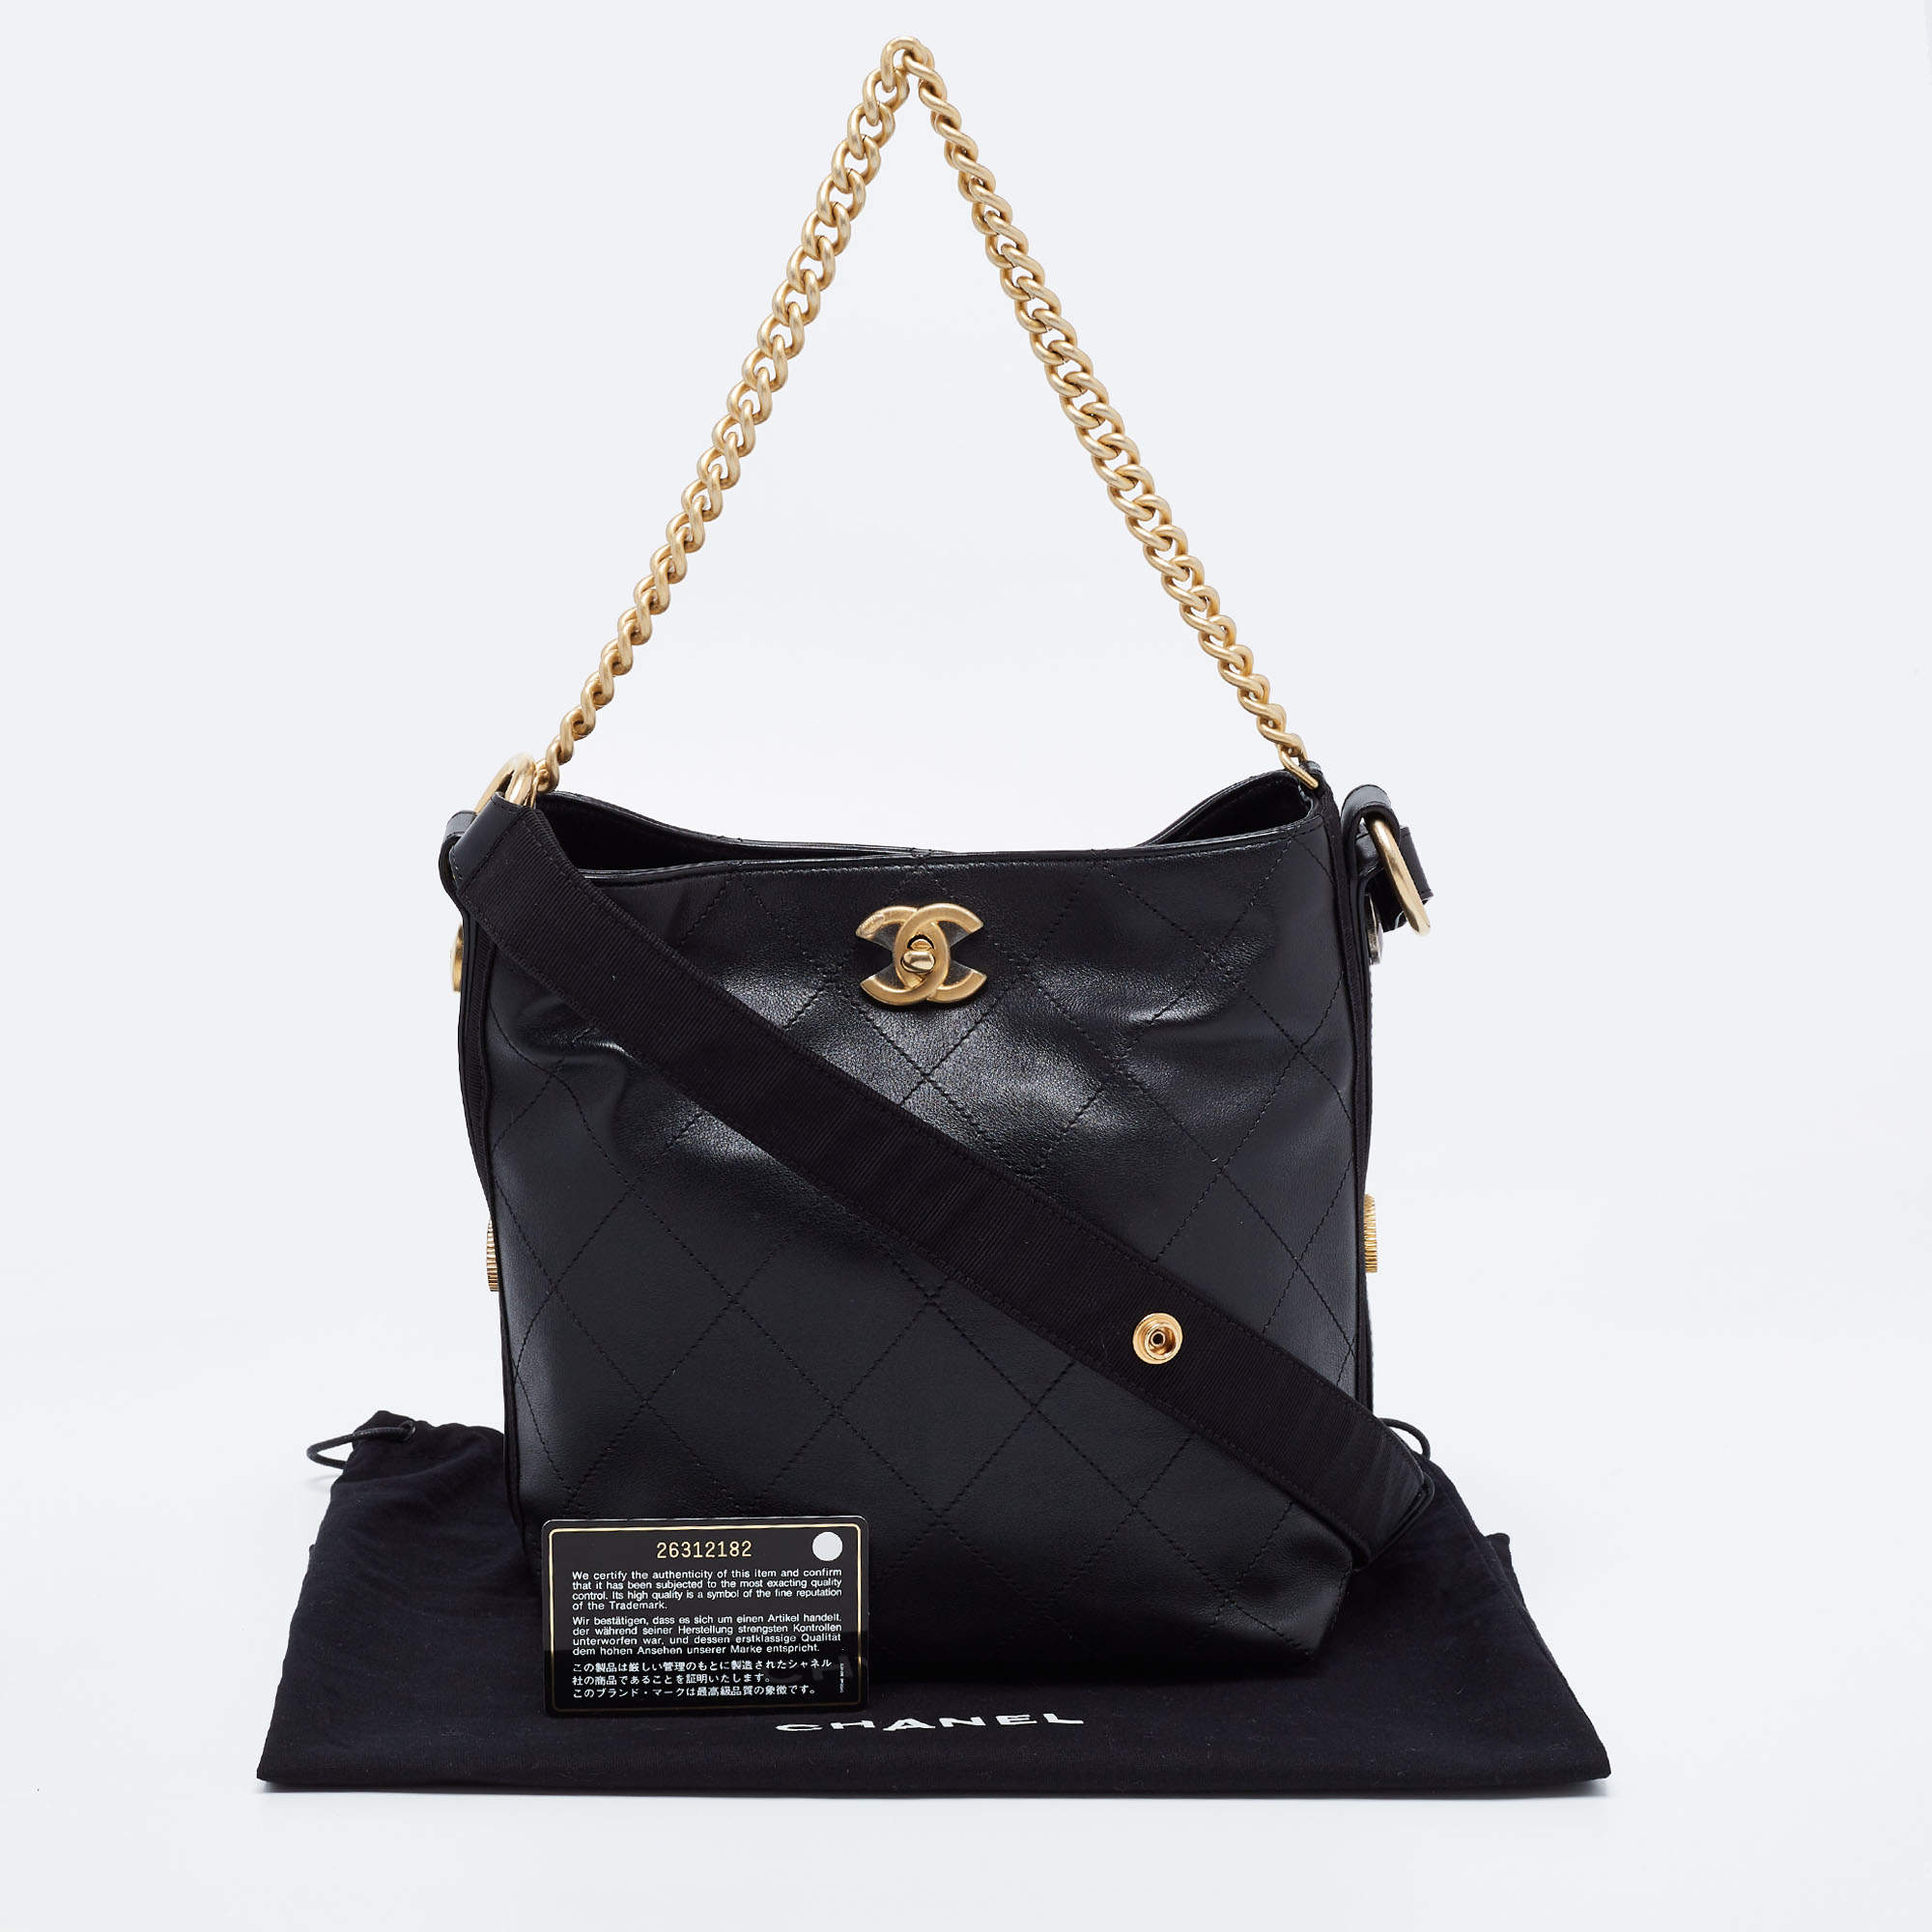 Chanel Black Quilt Stitched Leather Button Up Hobo Chanel